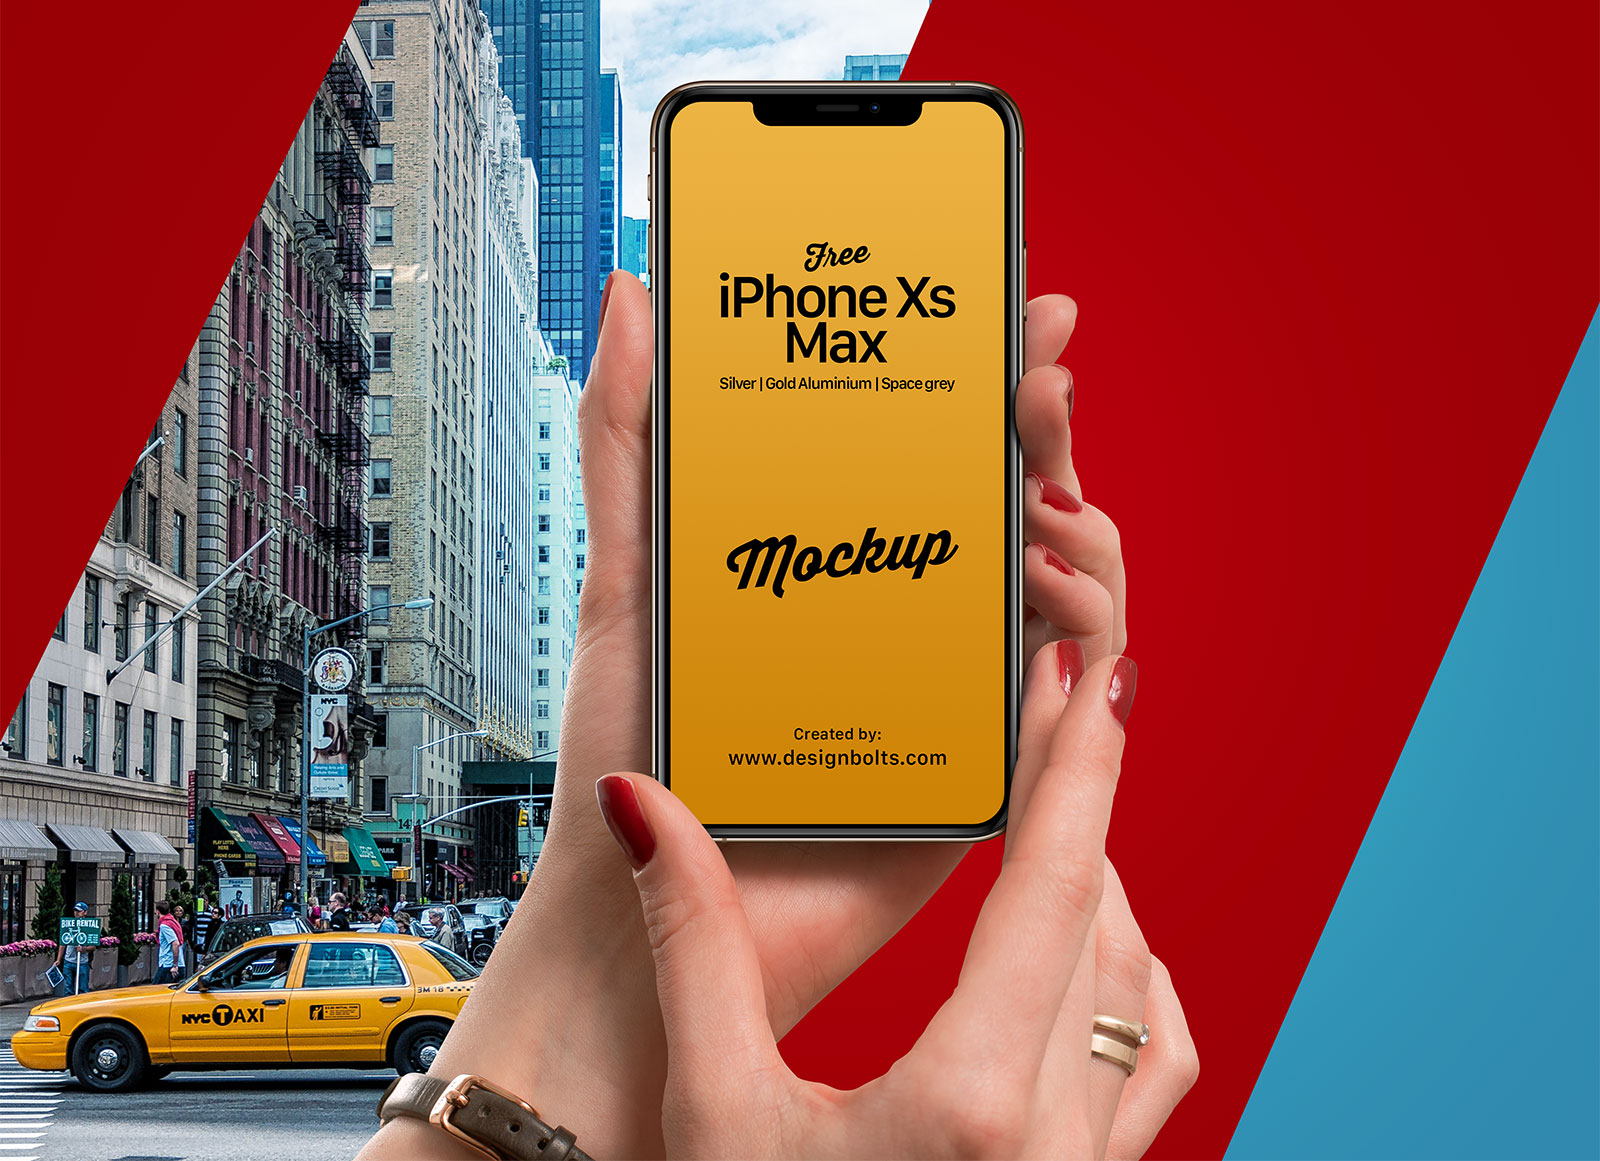 Free-iPhone-Xs-Max-in-Female-Hand-Mockup-PSD-2